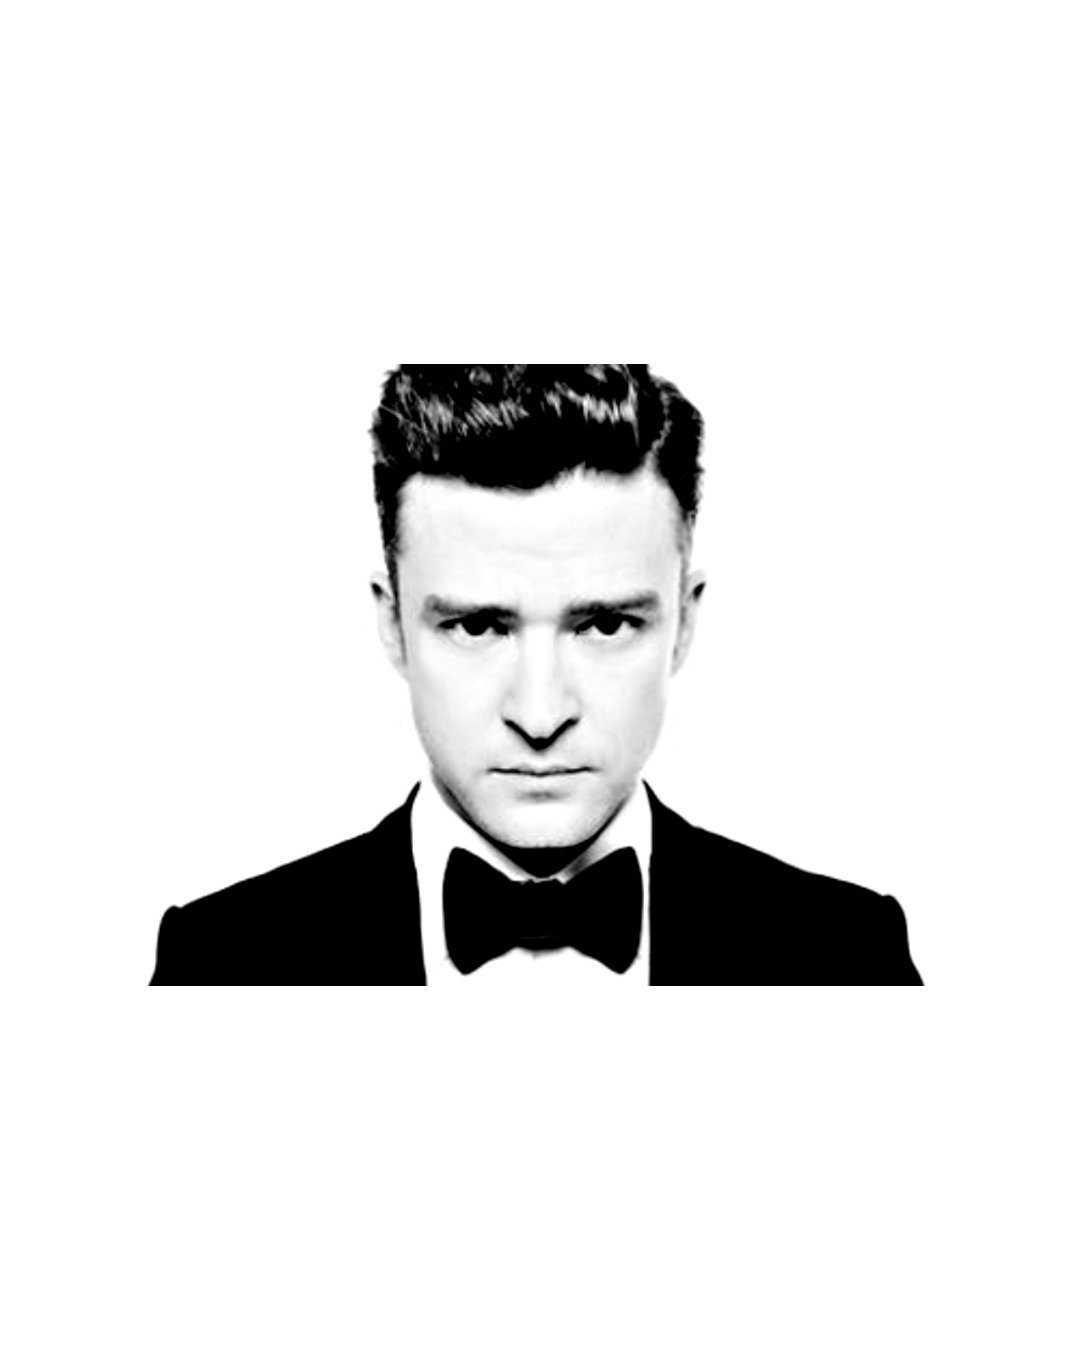 Timberlake tonight? See you at Messina before and after! 

#seattle #eatmessina #JT